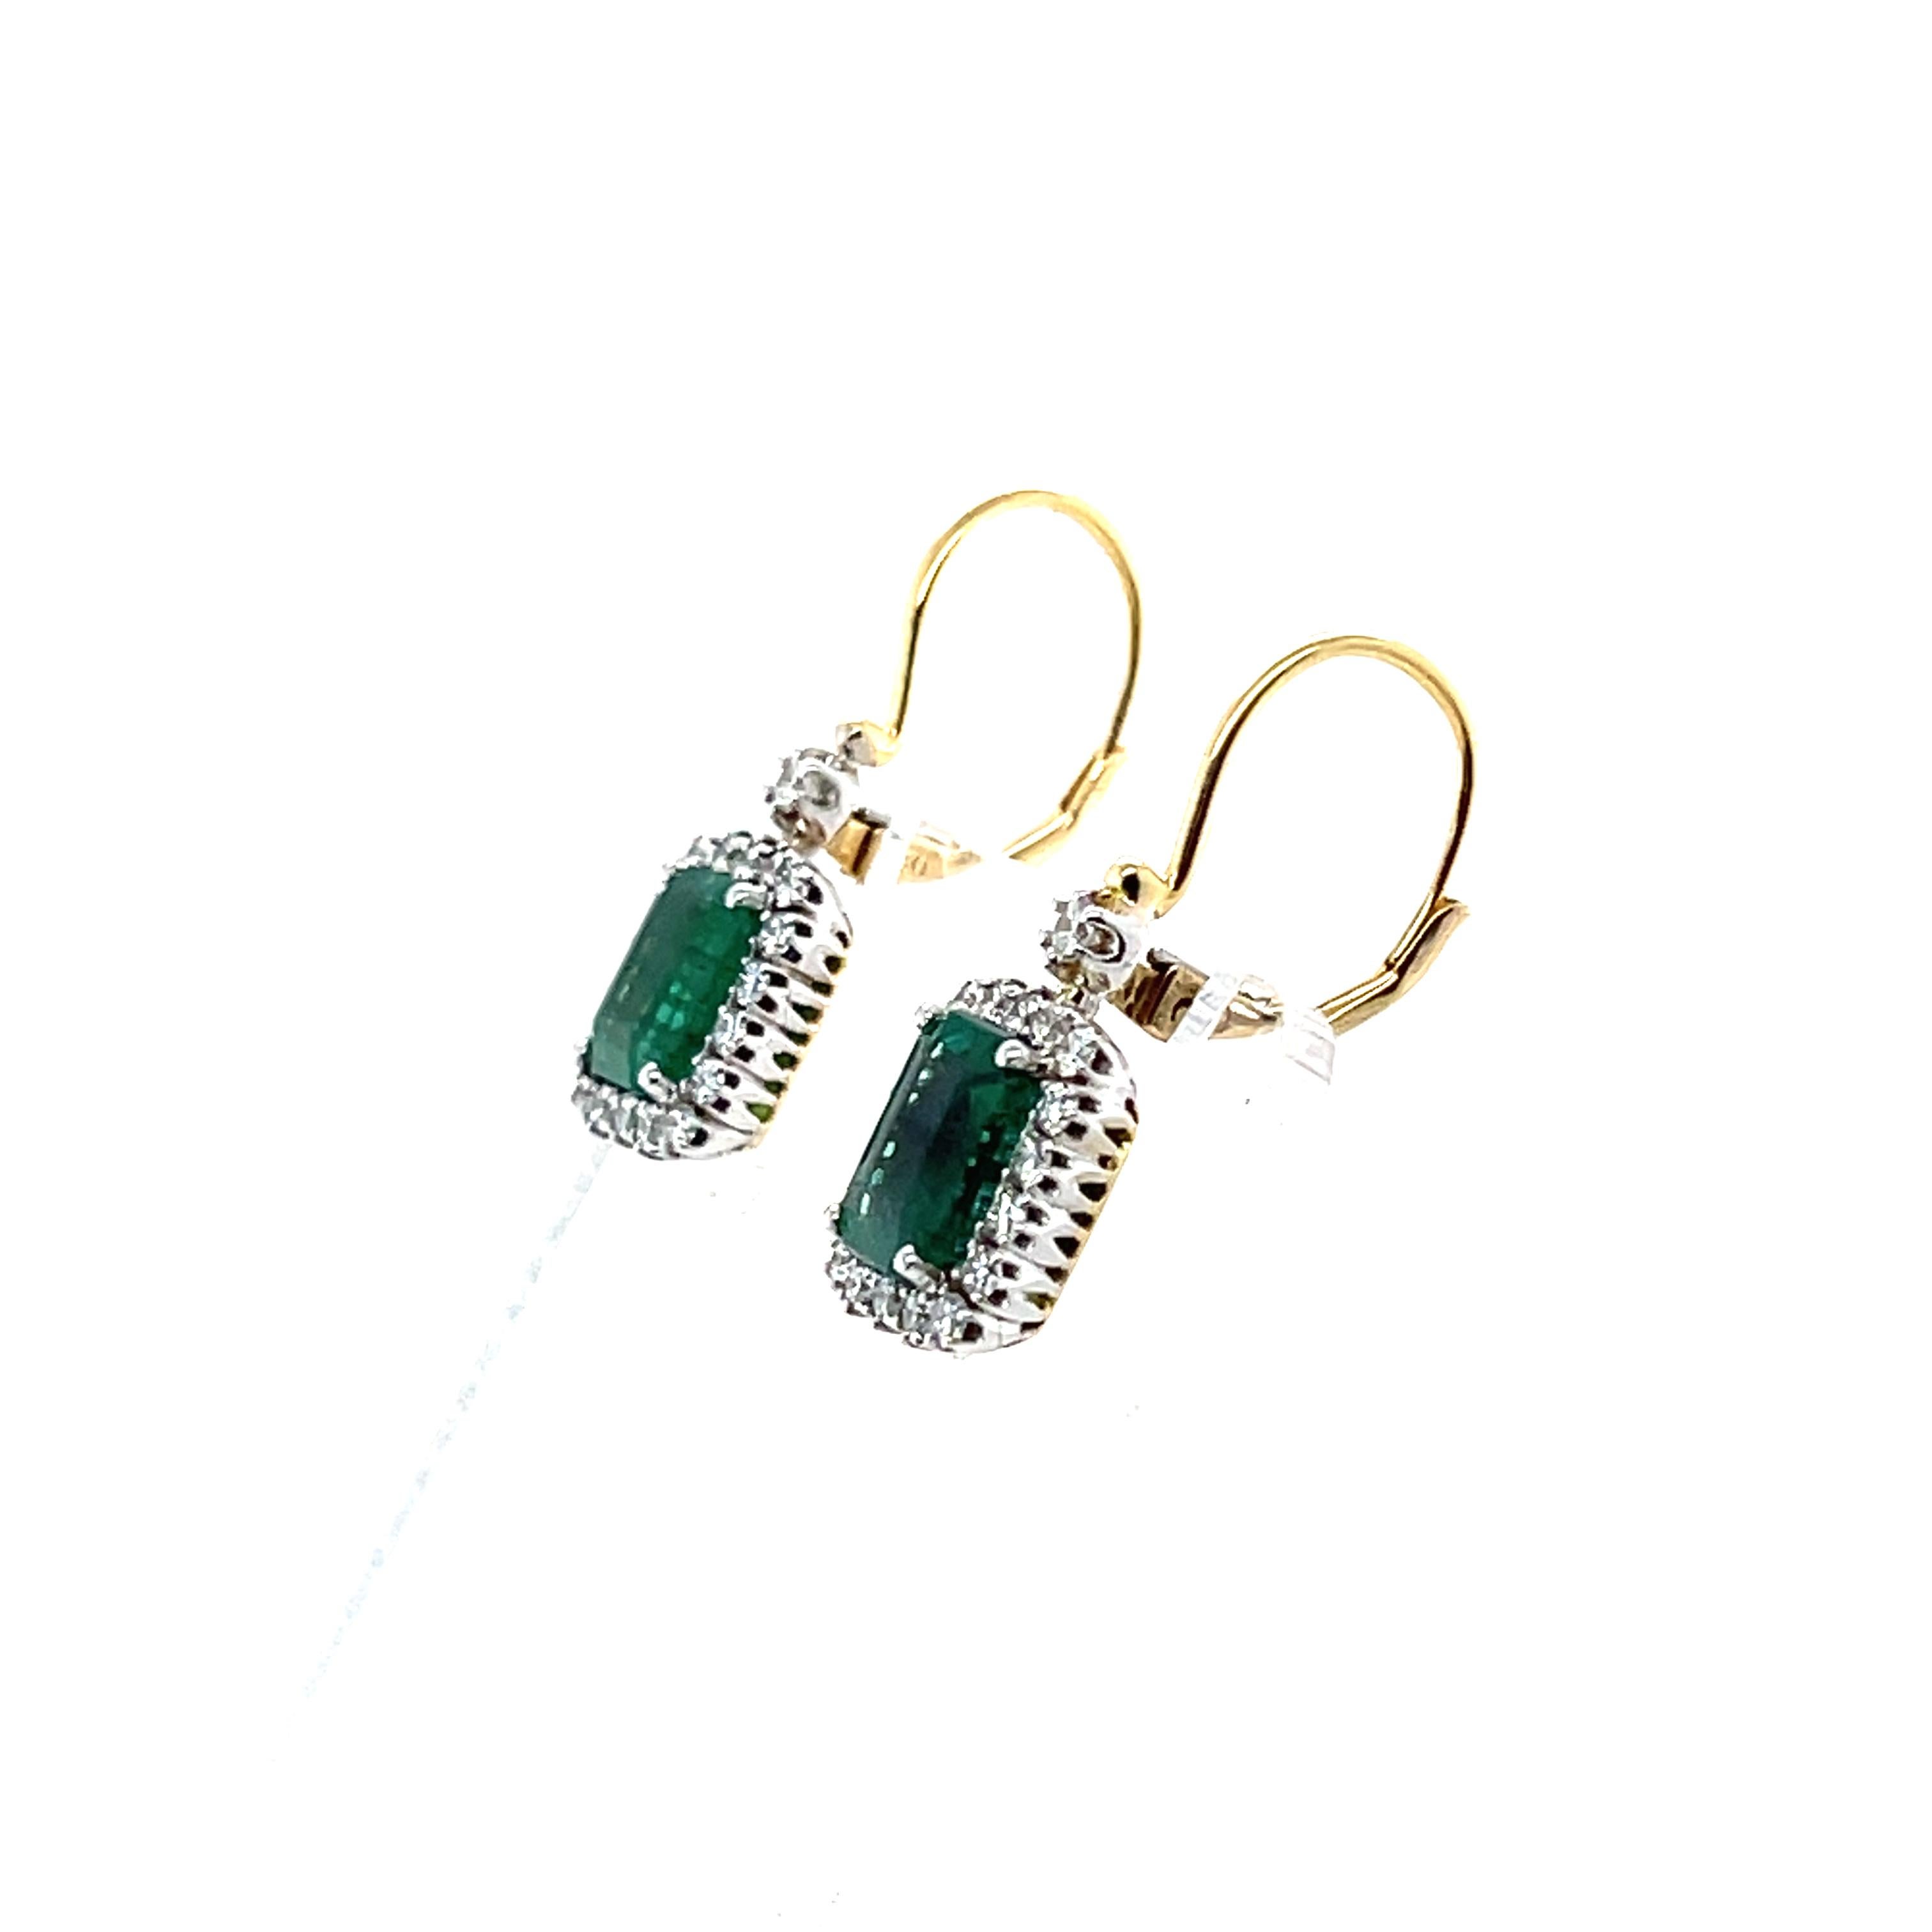 An outstanding set of Emerald Cut emerald earrings with stunning round brilliant cut Diamonds, on a beautiful French Hook earring design.

Emerald Weight: 2.87ct
Emerald Colour: 